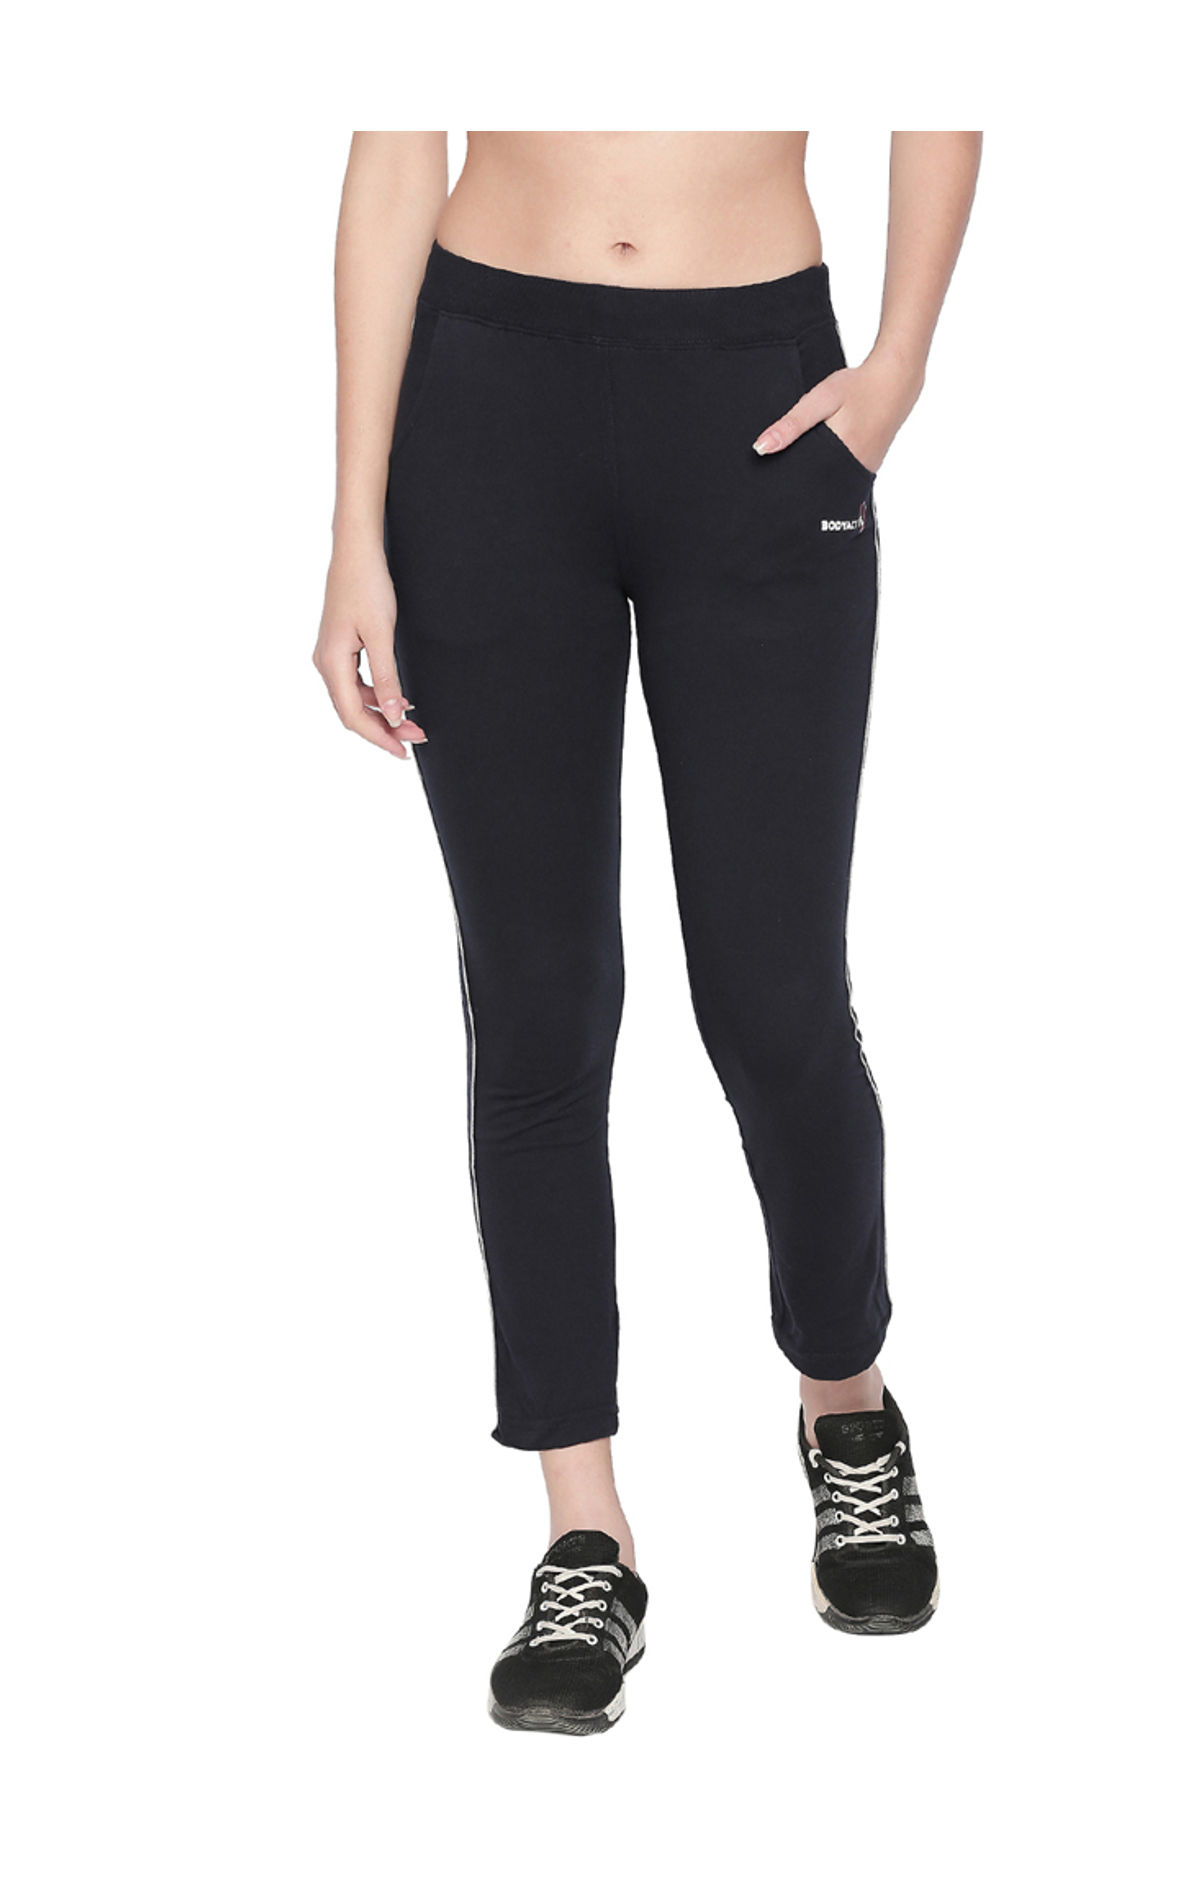 Womens Track Pants and Yoga Pants Manufacturer in New York, California